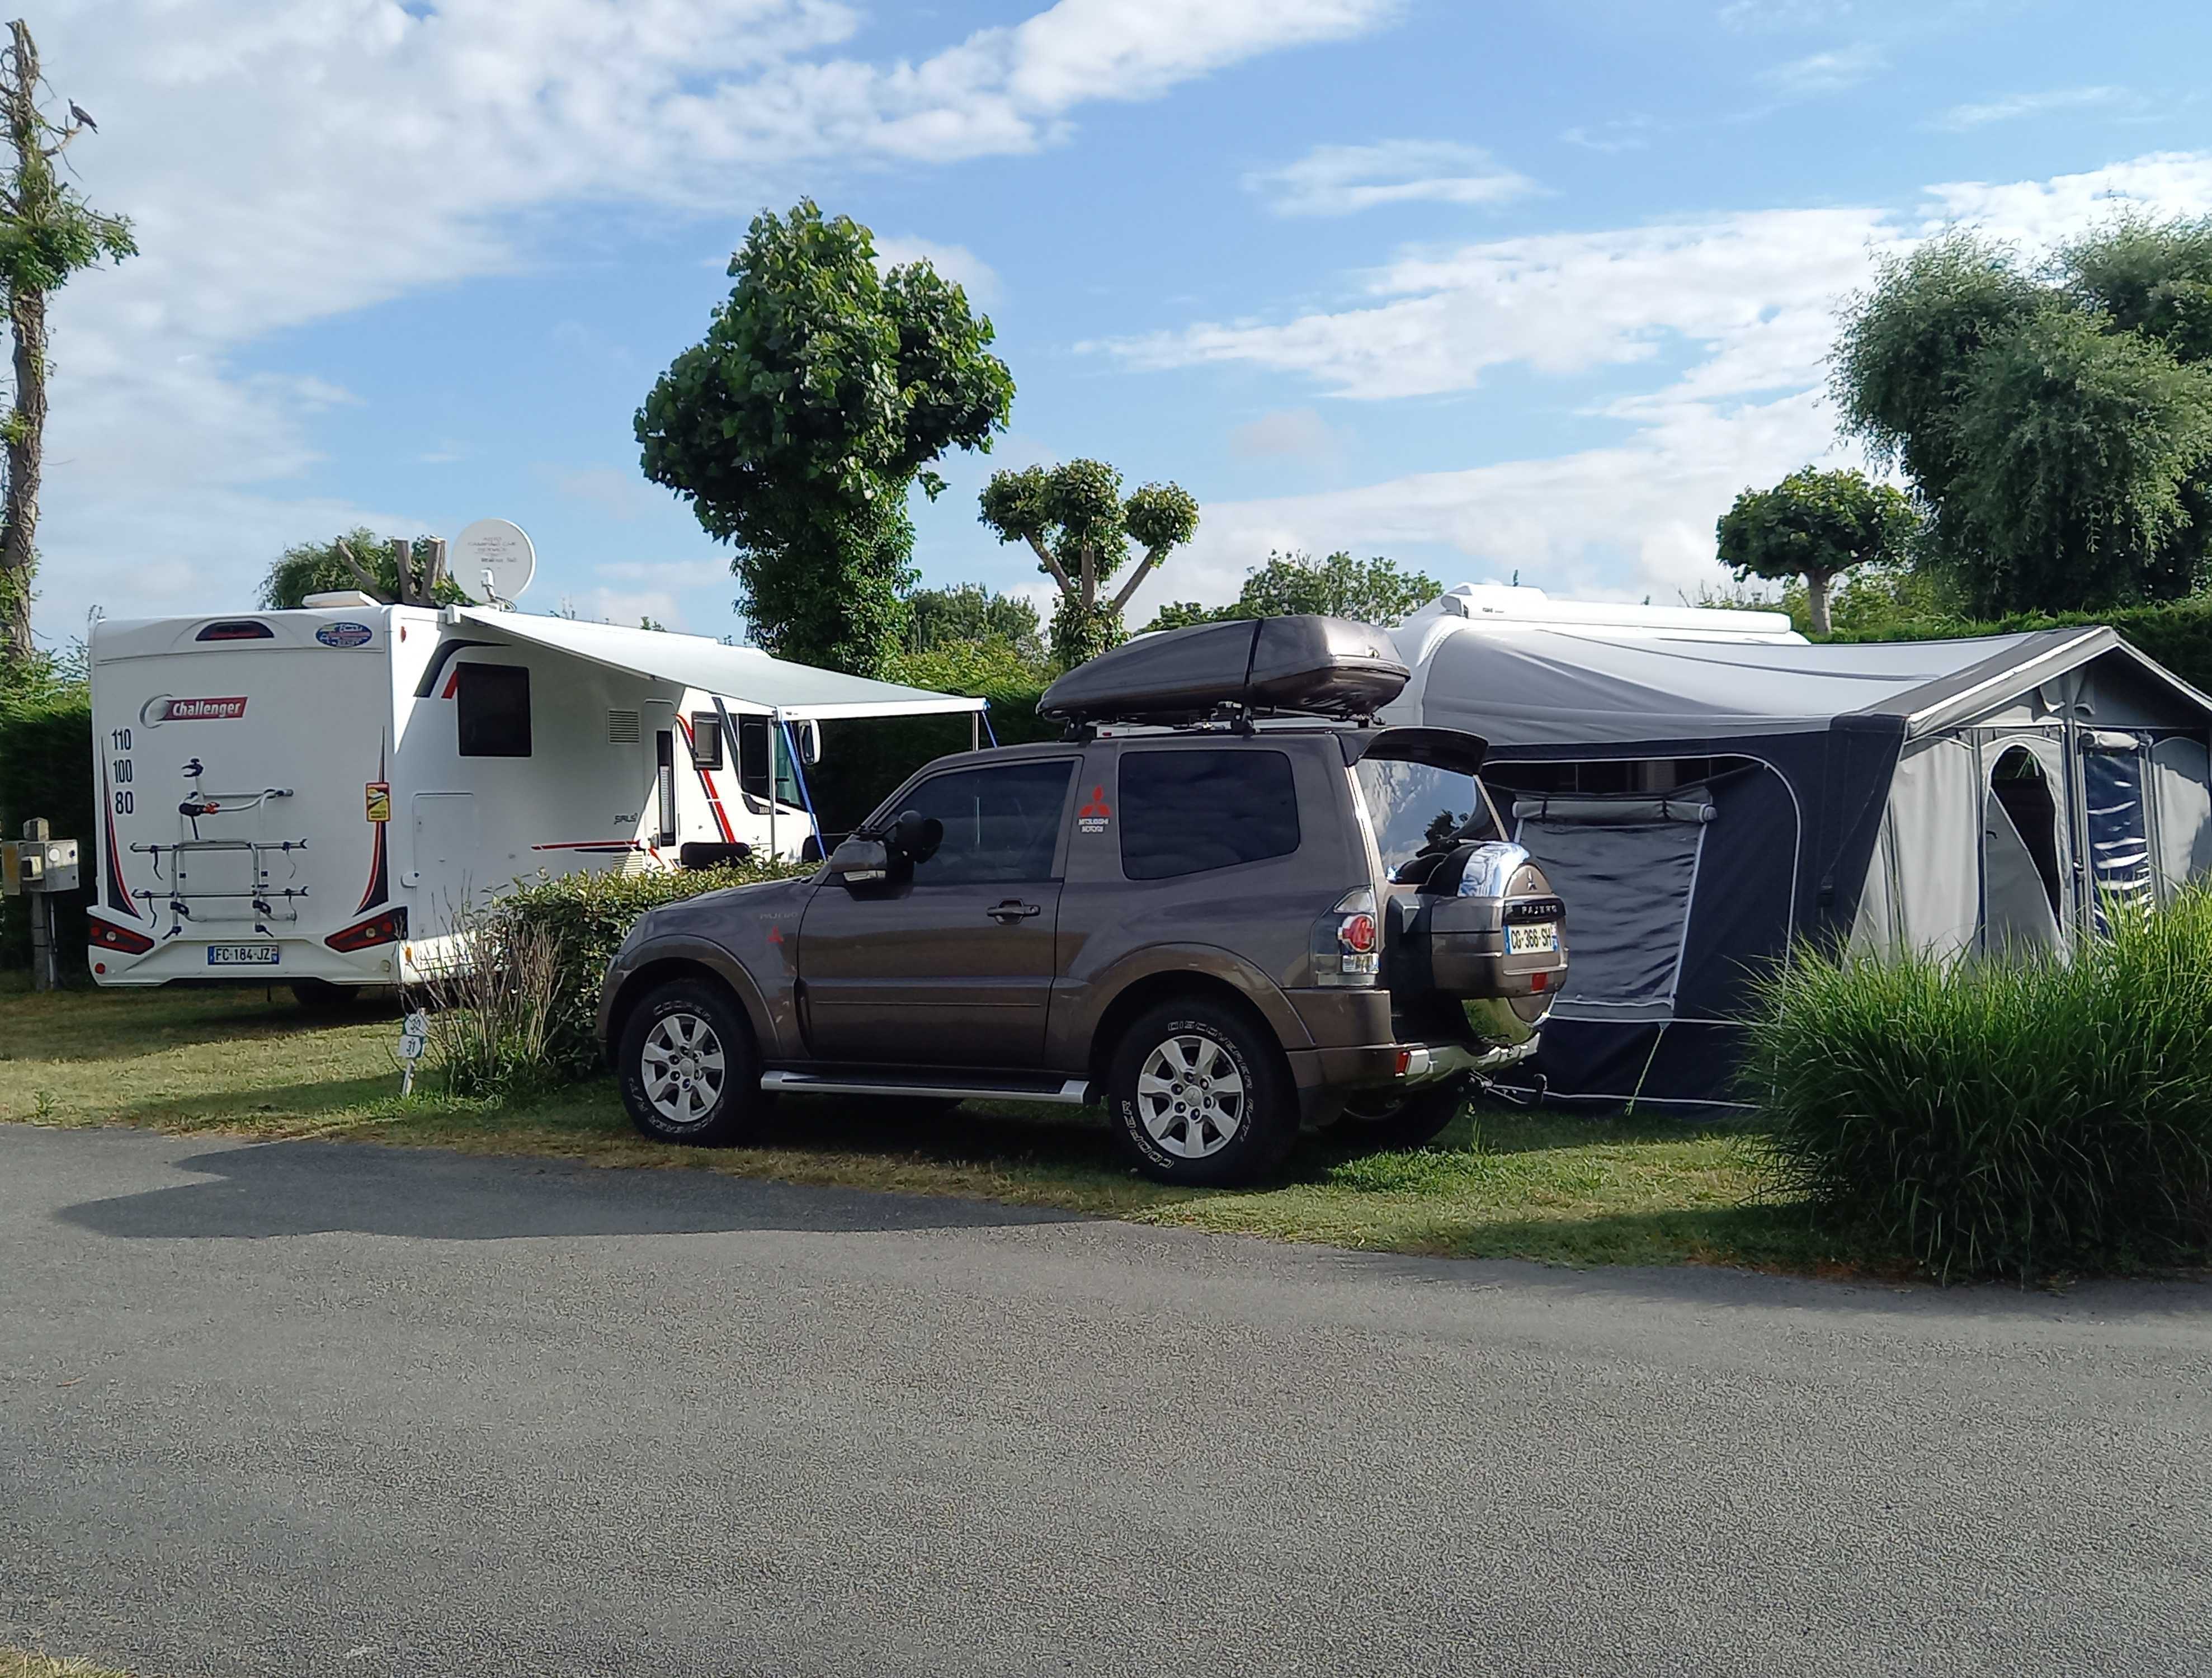 Pitch caravan  + 7.50 m  (water, electricity, drain, 2 people and 1 vehicle) 1/2 Ppl. 1/2 pers.